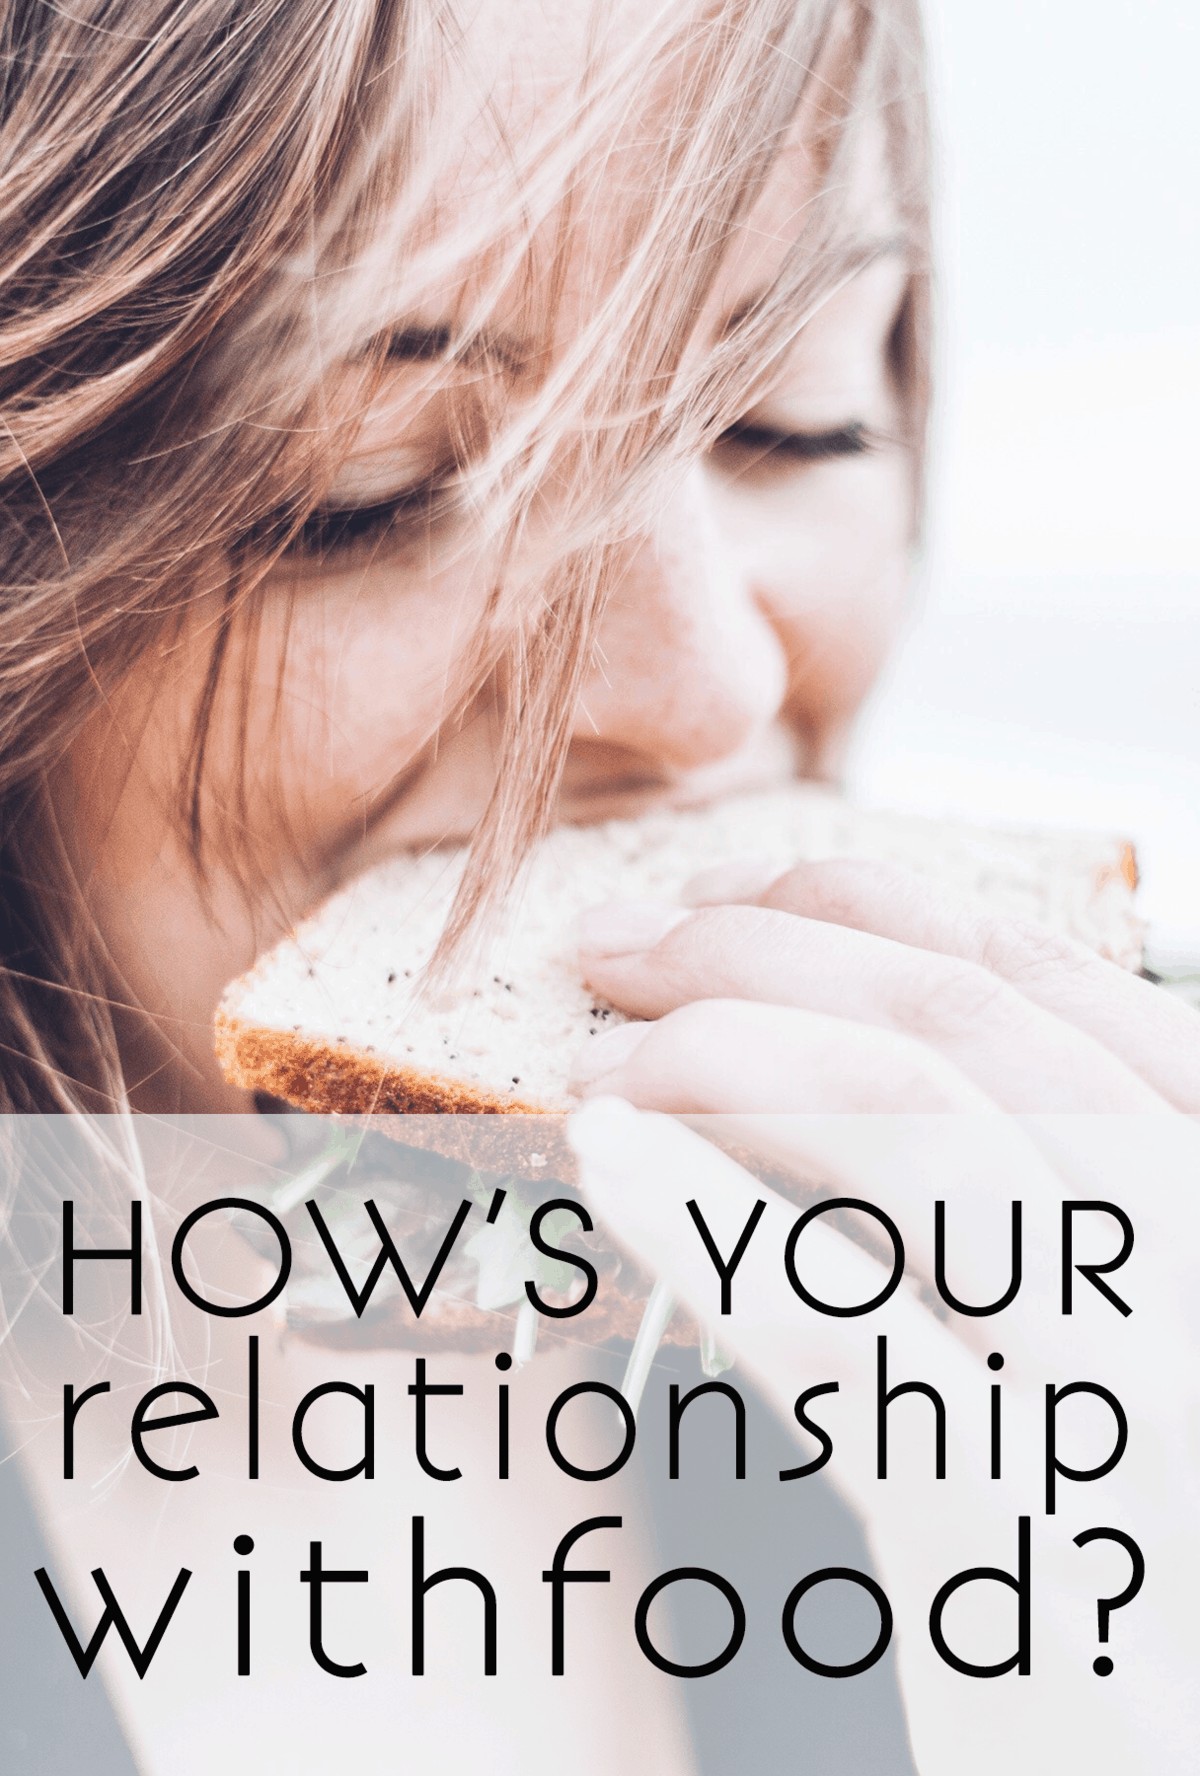 How's your relationship with food?